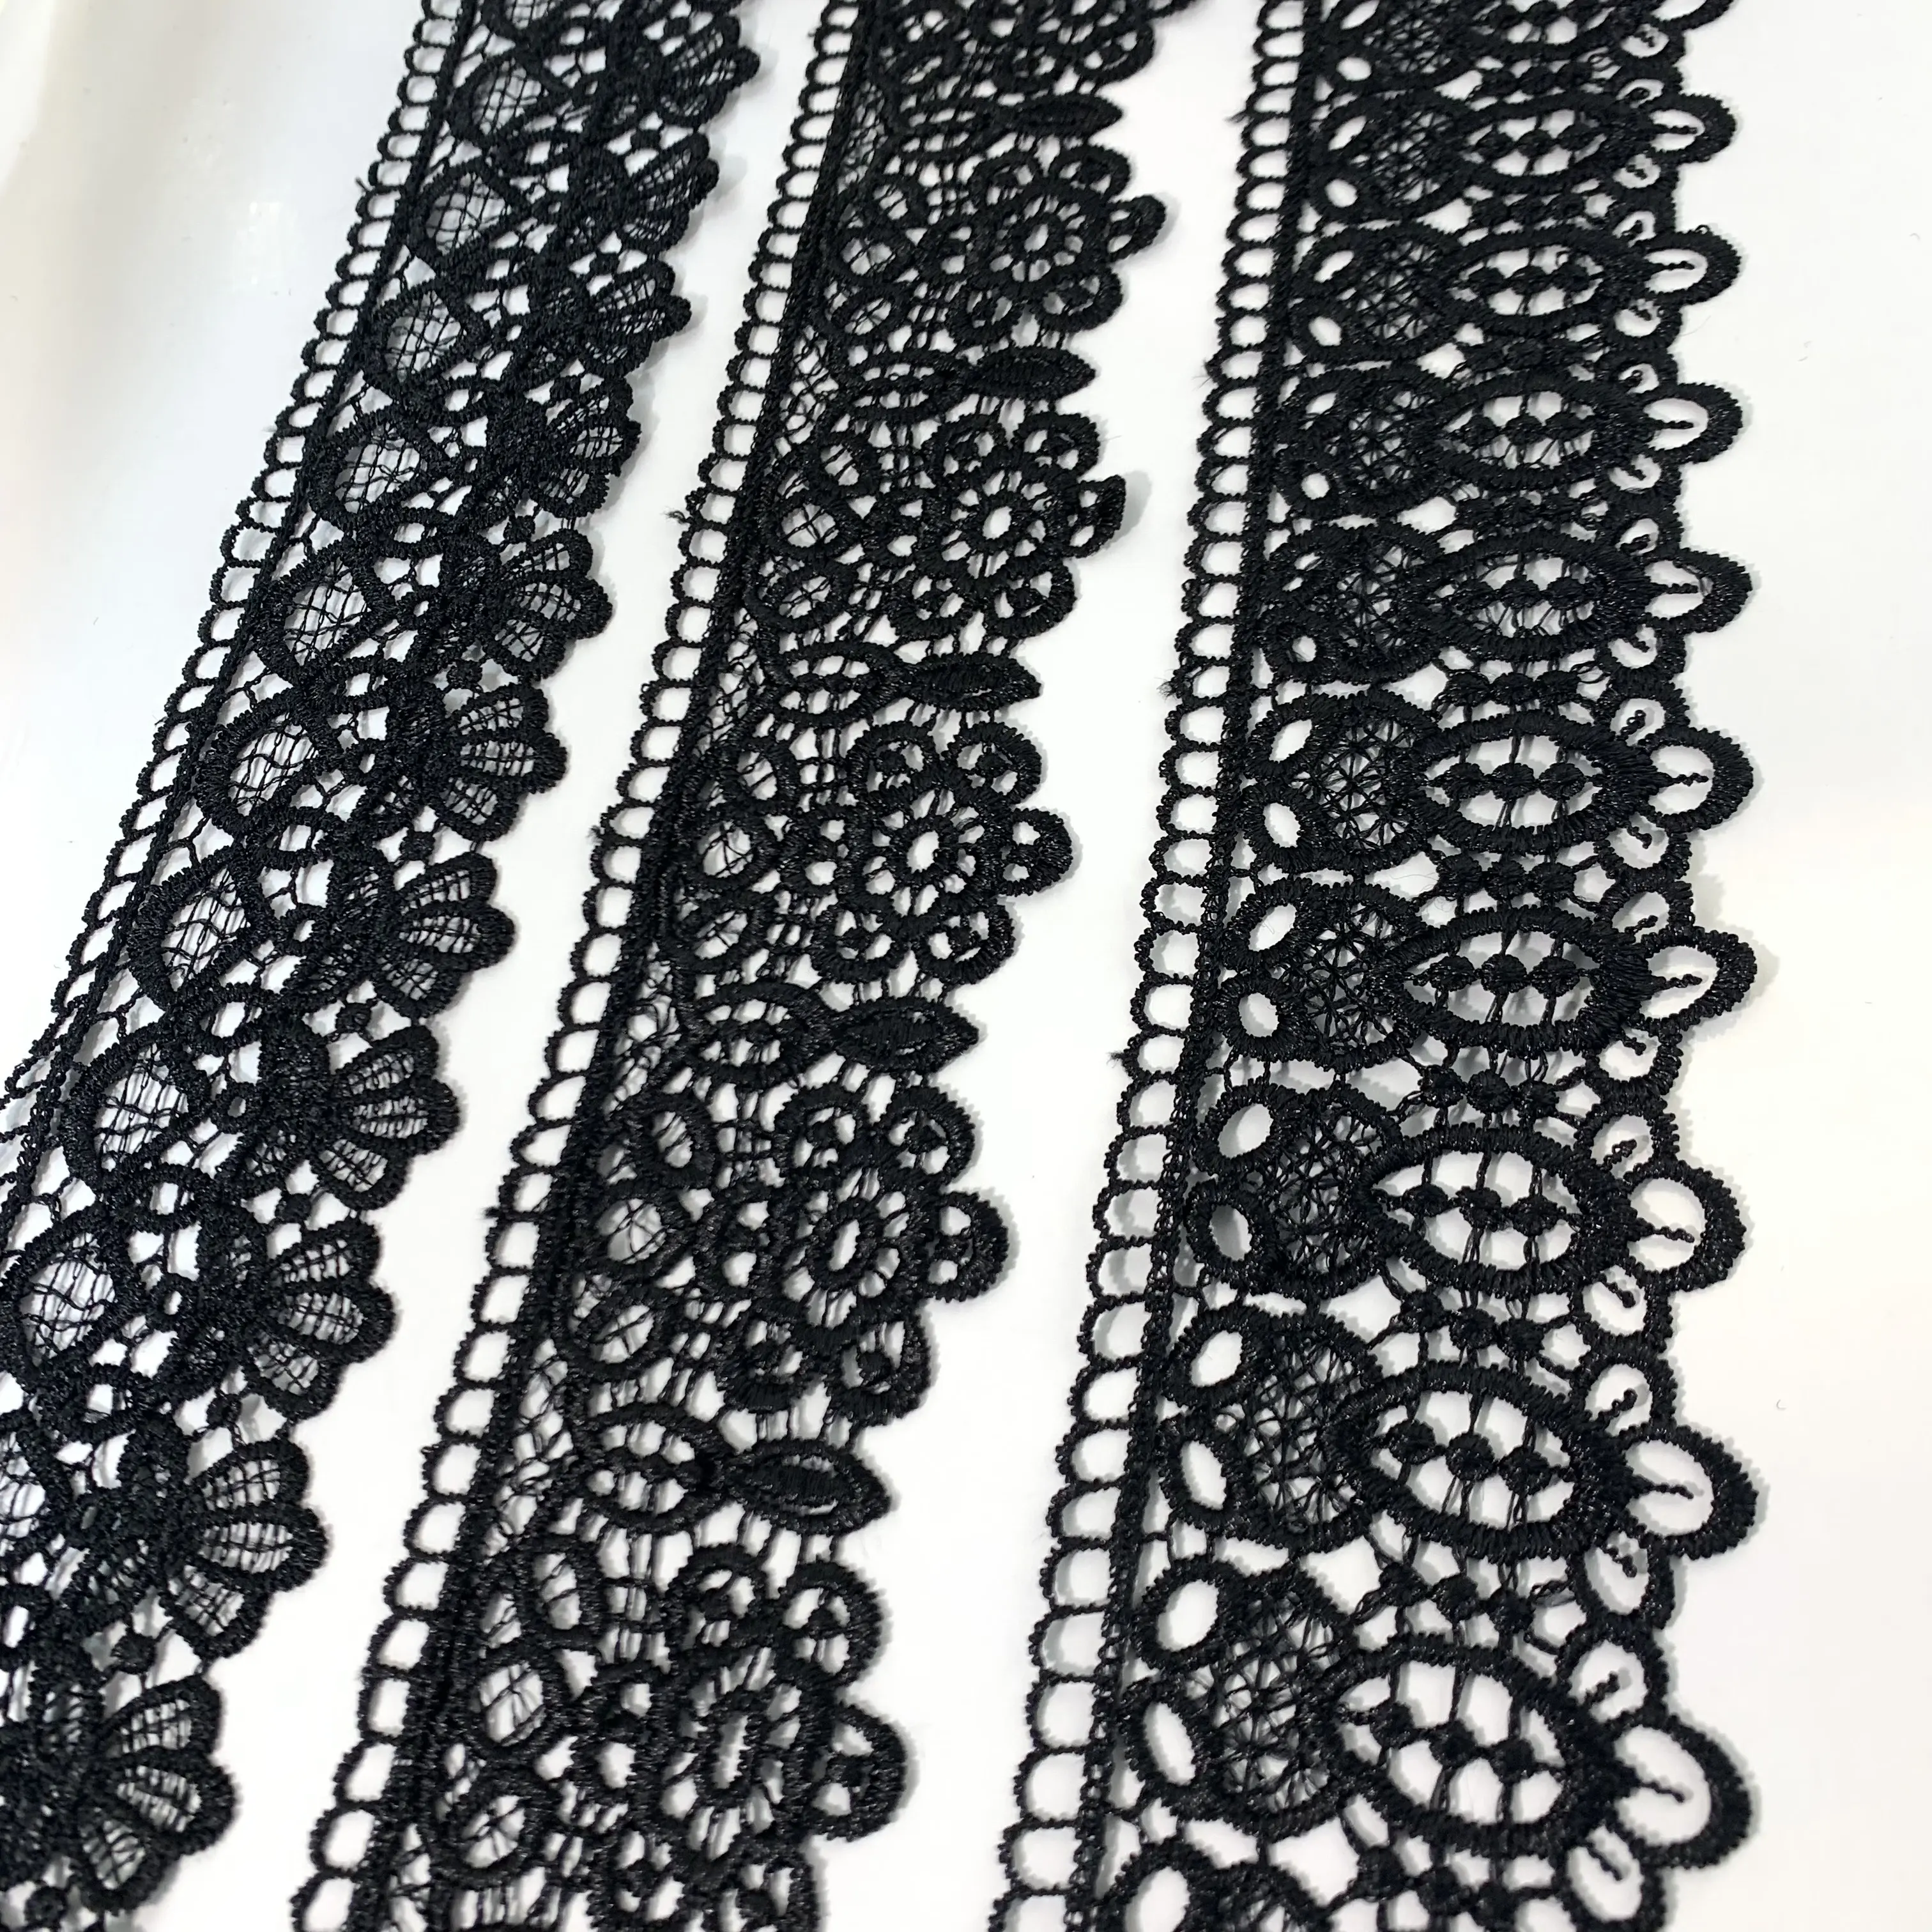 Custom Design High Quality Guipure Lace Ribbon Trim Fancy Embroidery Floral Lace Fabric Trim